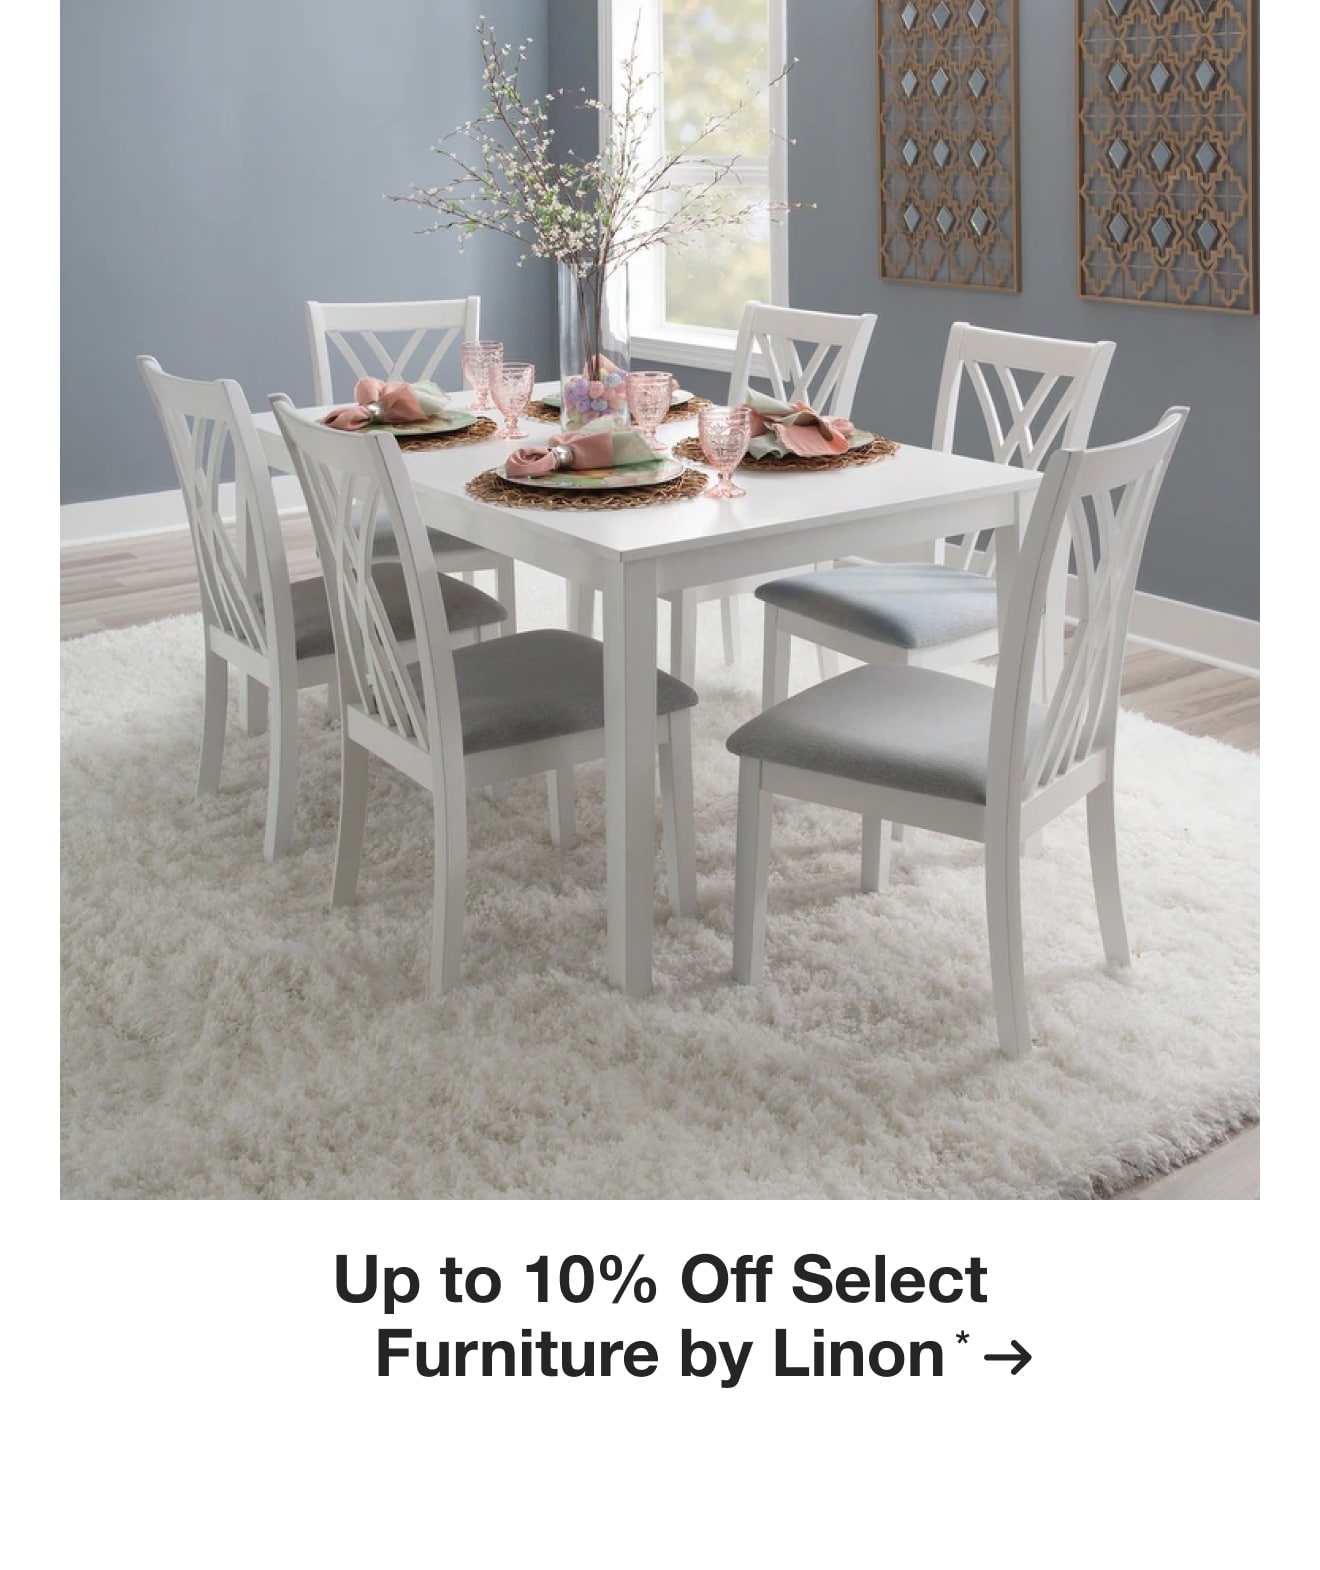 Up to 10% off Select Furniture by Linon*